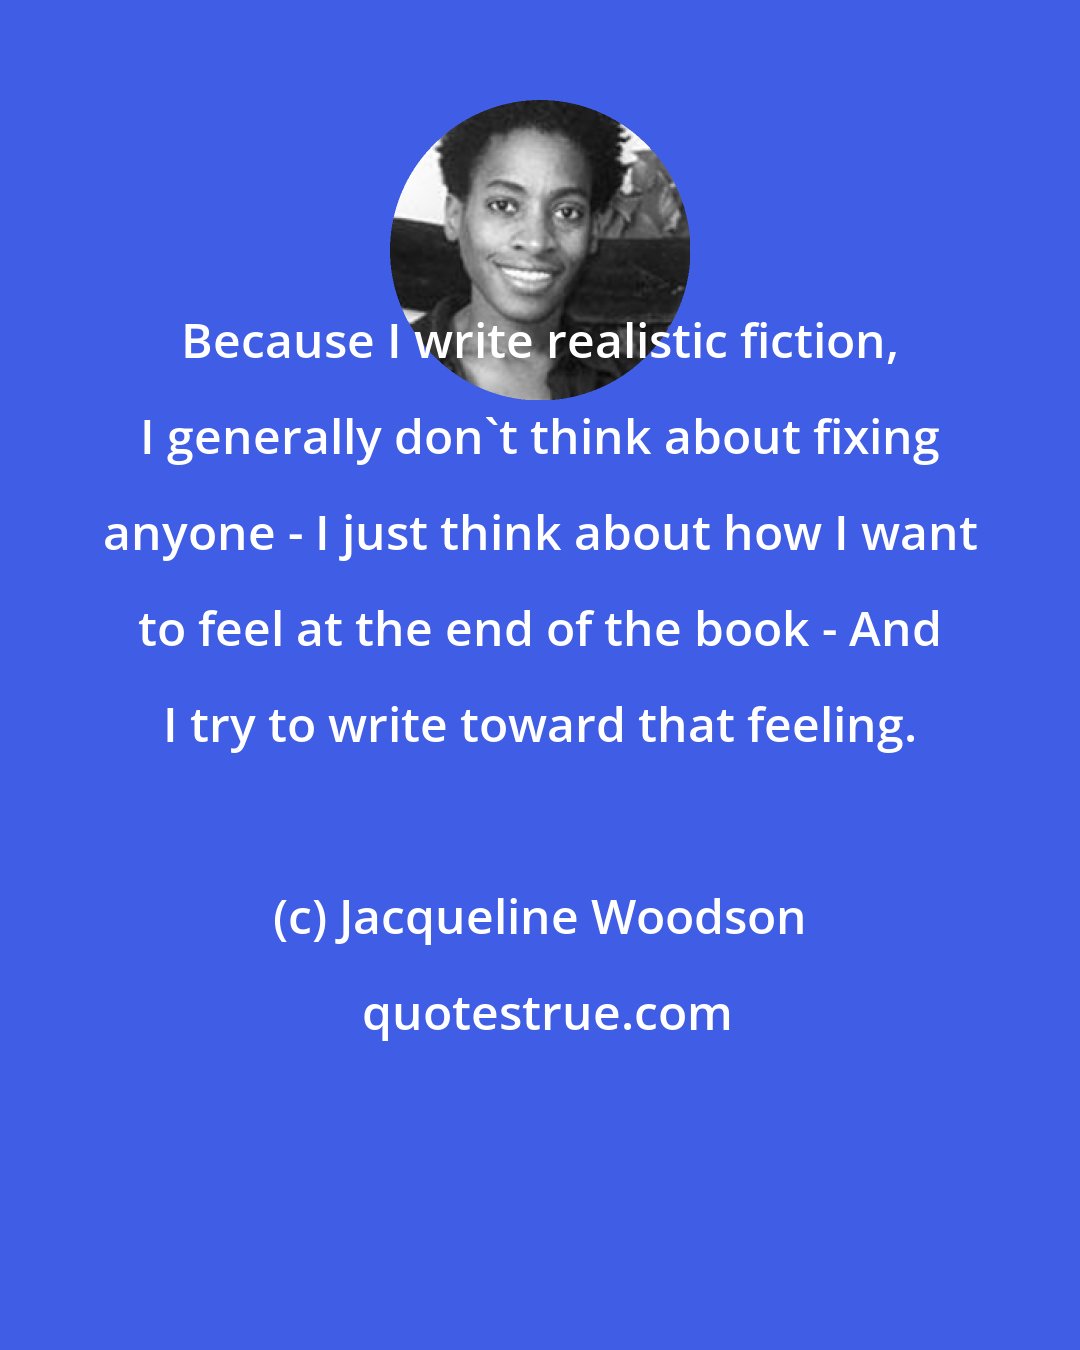 Jacqueline Woodson: Because I write realistic fiction, I generally don't think about fixing anyone - I just think about how I want to feel at the end of the book - And I try to write toward that feeling.